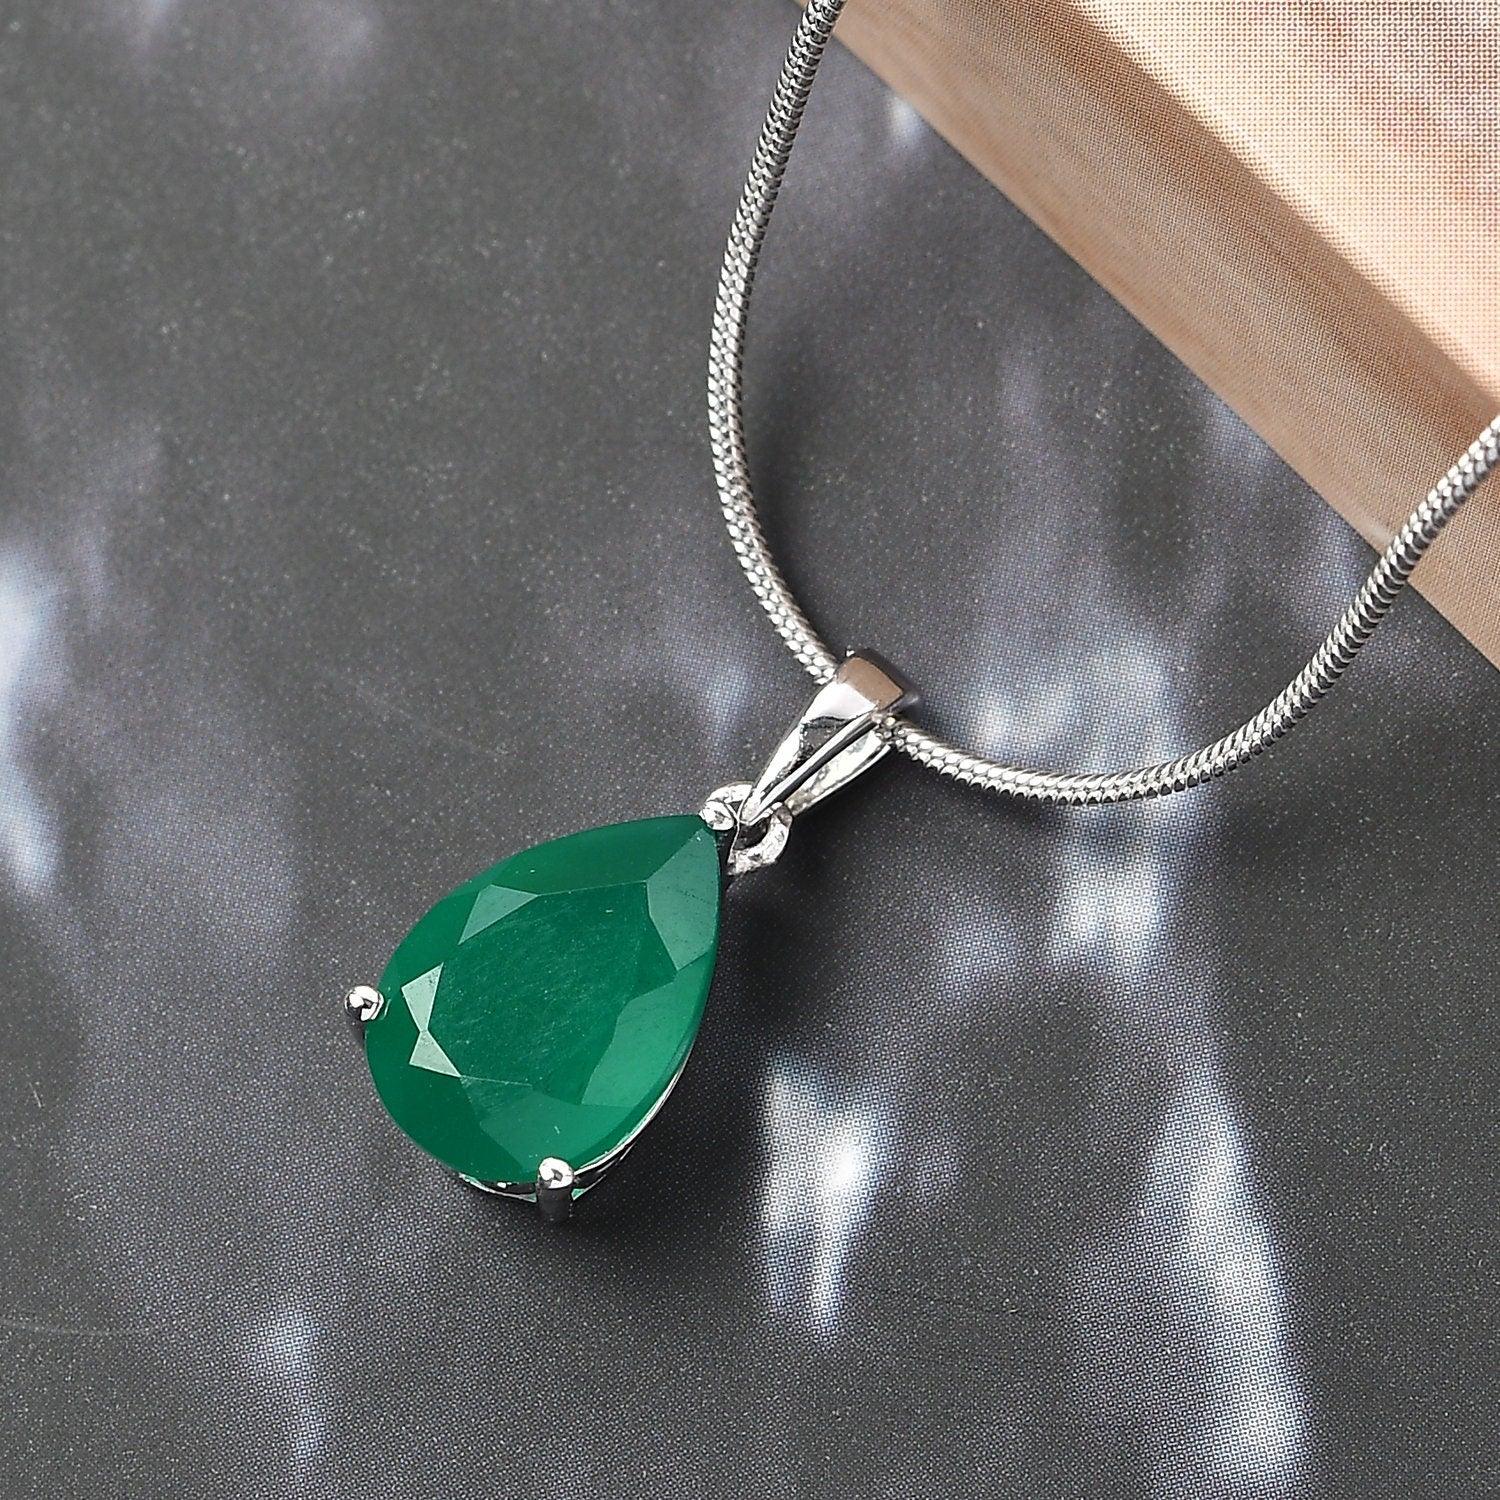 Genuine Green Onyx Pendant, Solitaire Pendant Necklace, May Birthstone Necklace, 925 Sterling Silver, Gift for her - Inspiring Jewellery